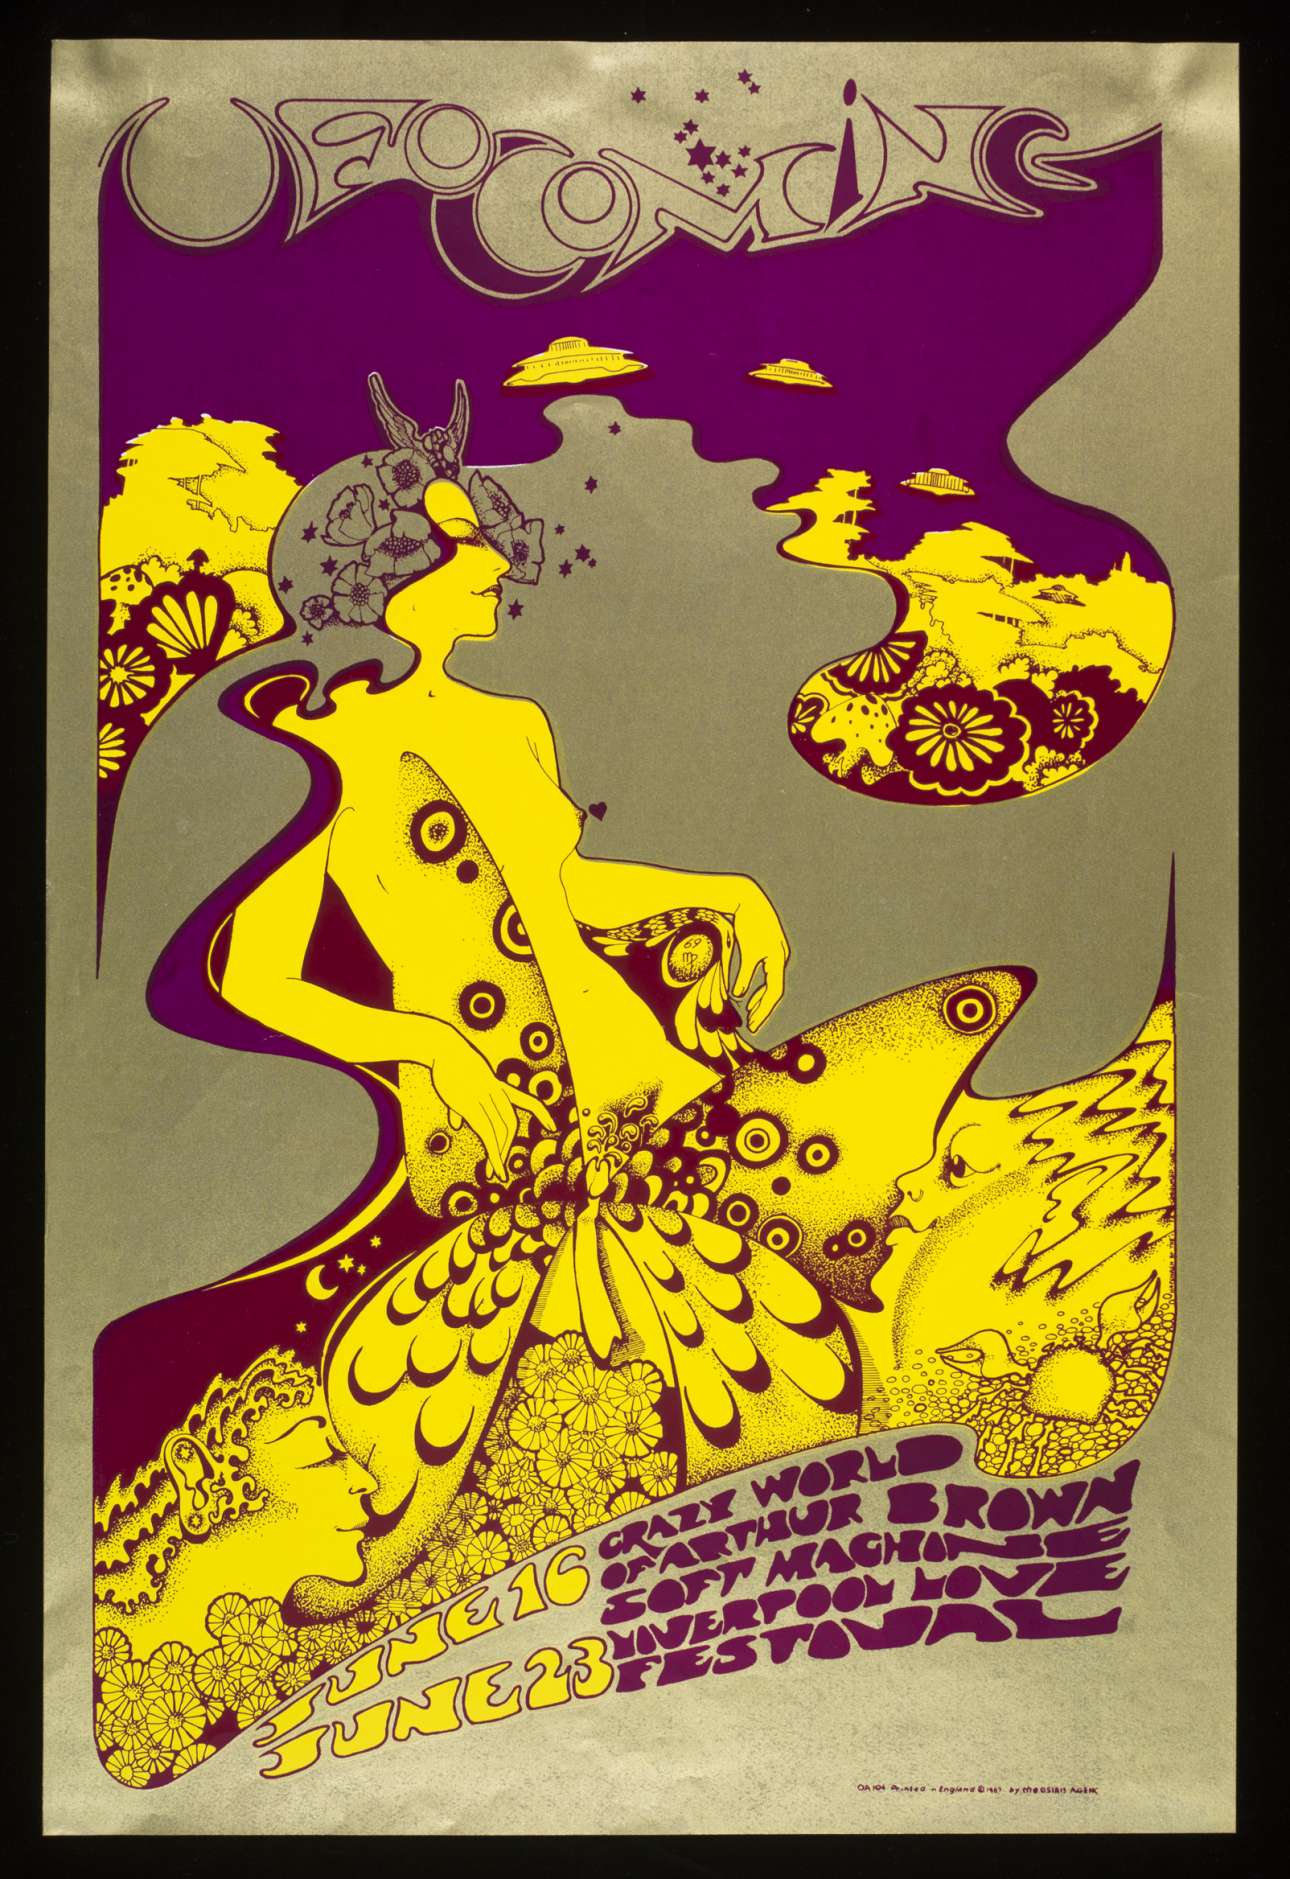 6._Poster_for_The_Crazy_World_of_Arthur_Brown_at_UFO_16_and_23_June_by_Hapshash_and_the_Coloured_Coat_1967_London_Michael_English_and_Nigel_Waymouth